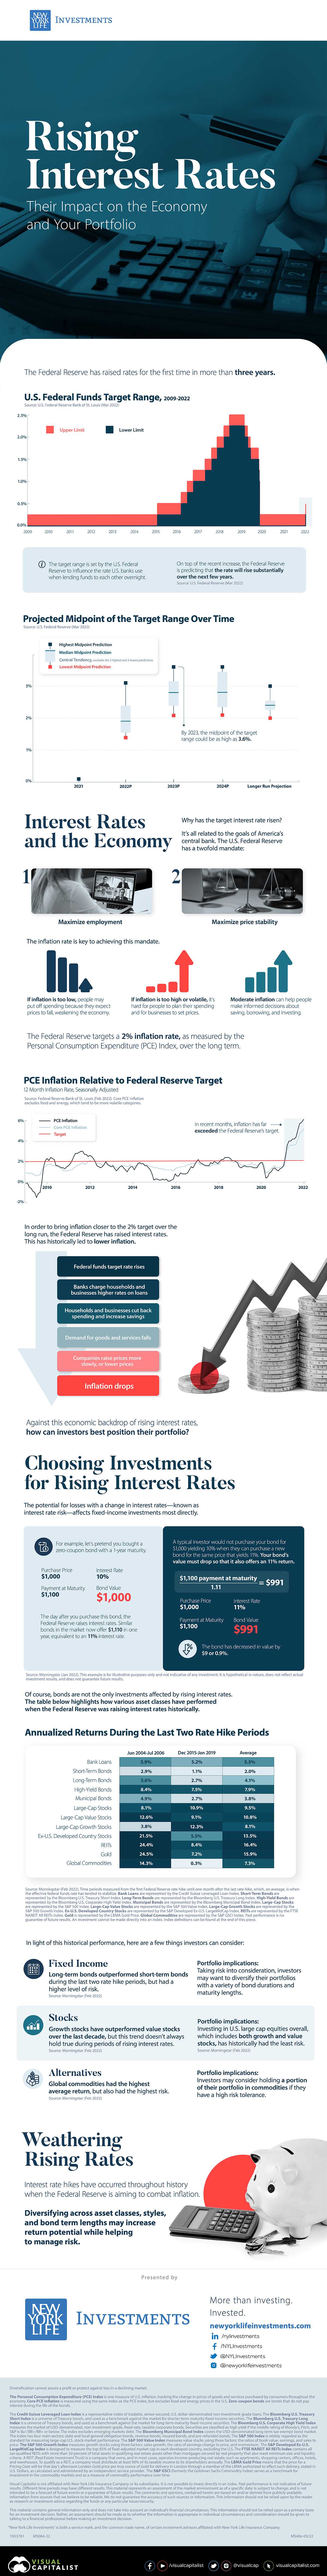 Infographic showing the historical federal funds target rate, projections for the target rate, and why high inflation has led to an interest rate increase. The graphic also shows how rising interest rates affect various investments using annualized returns during the last two rate hike periods.